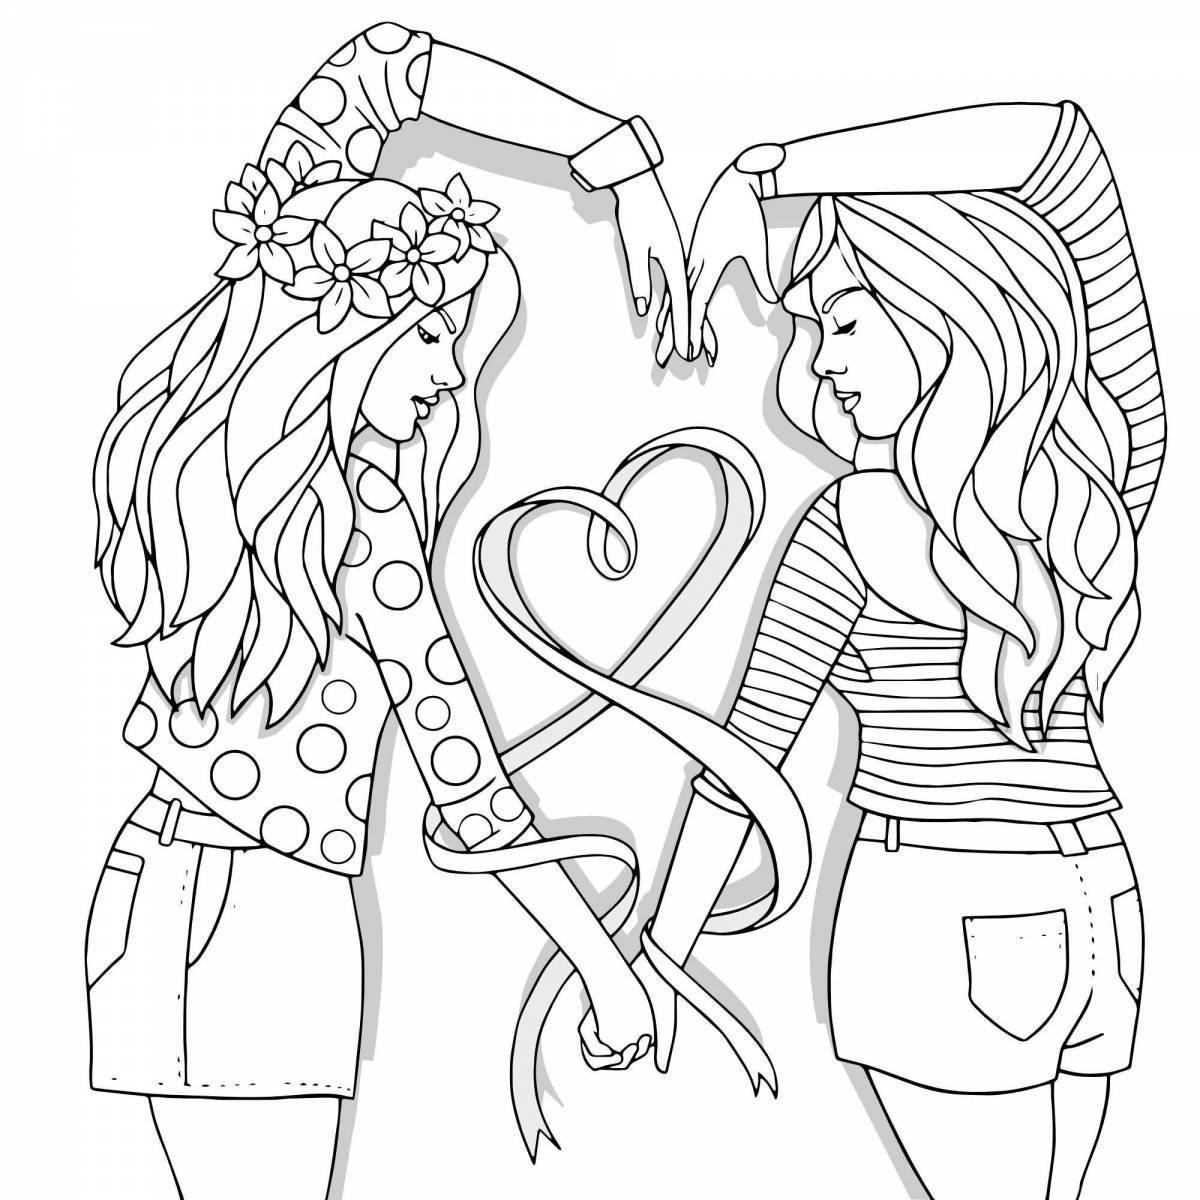 Glowing Laura coloring page